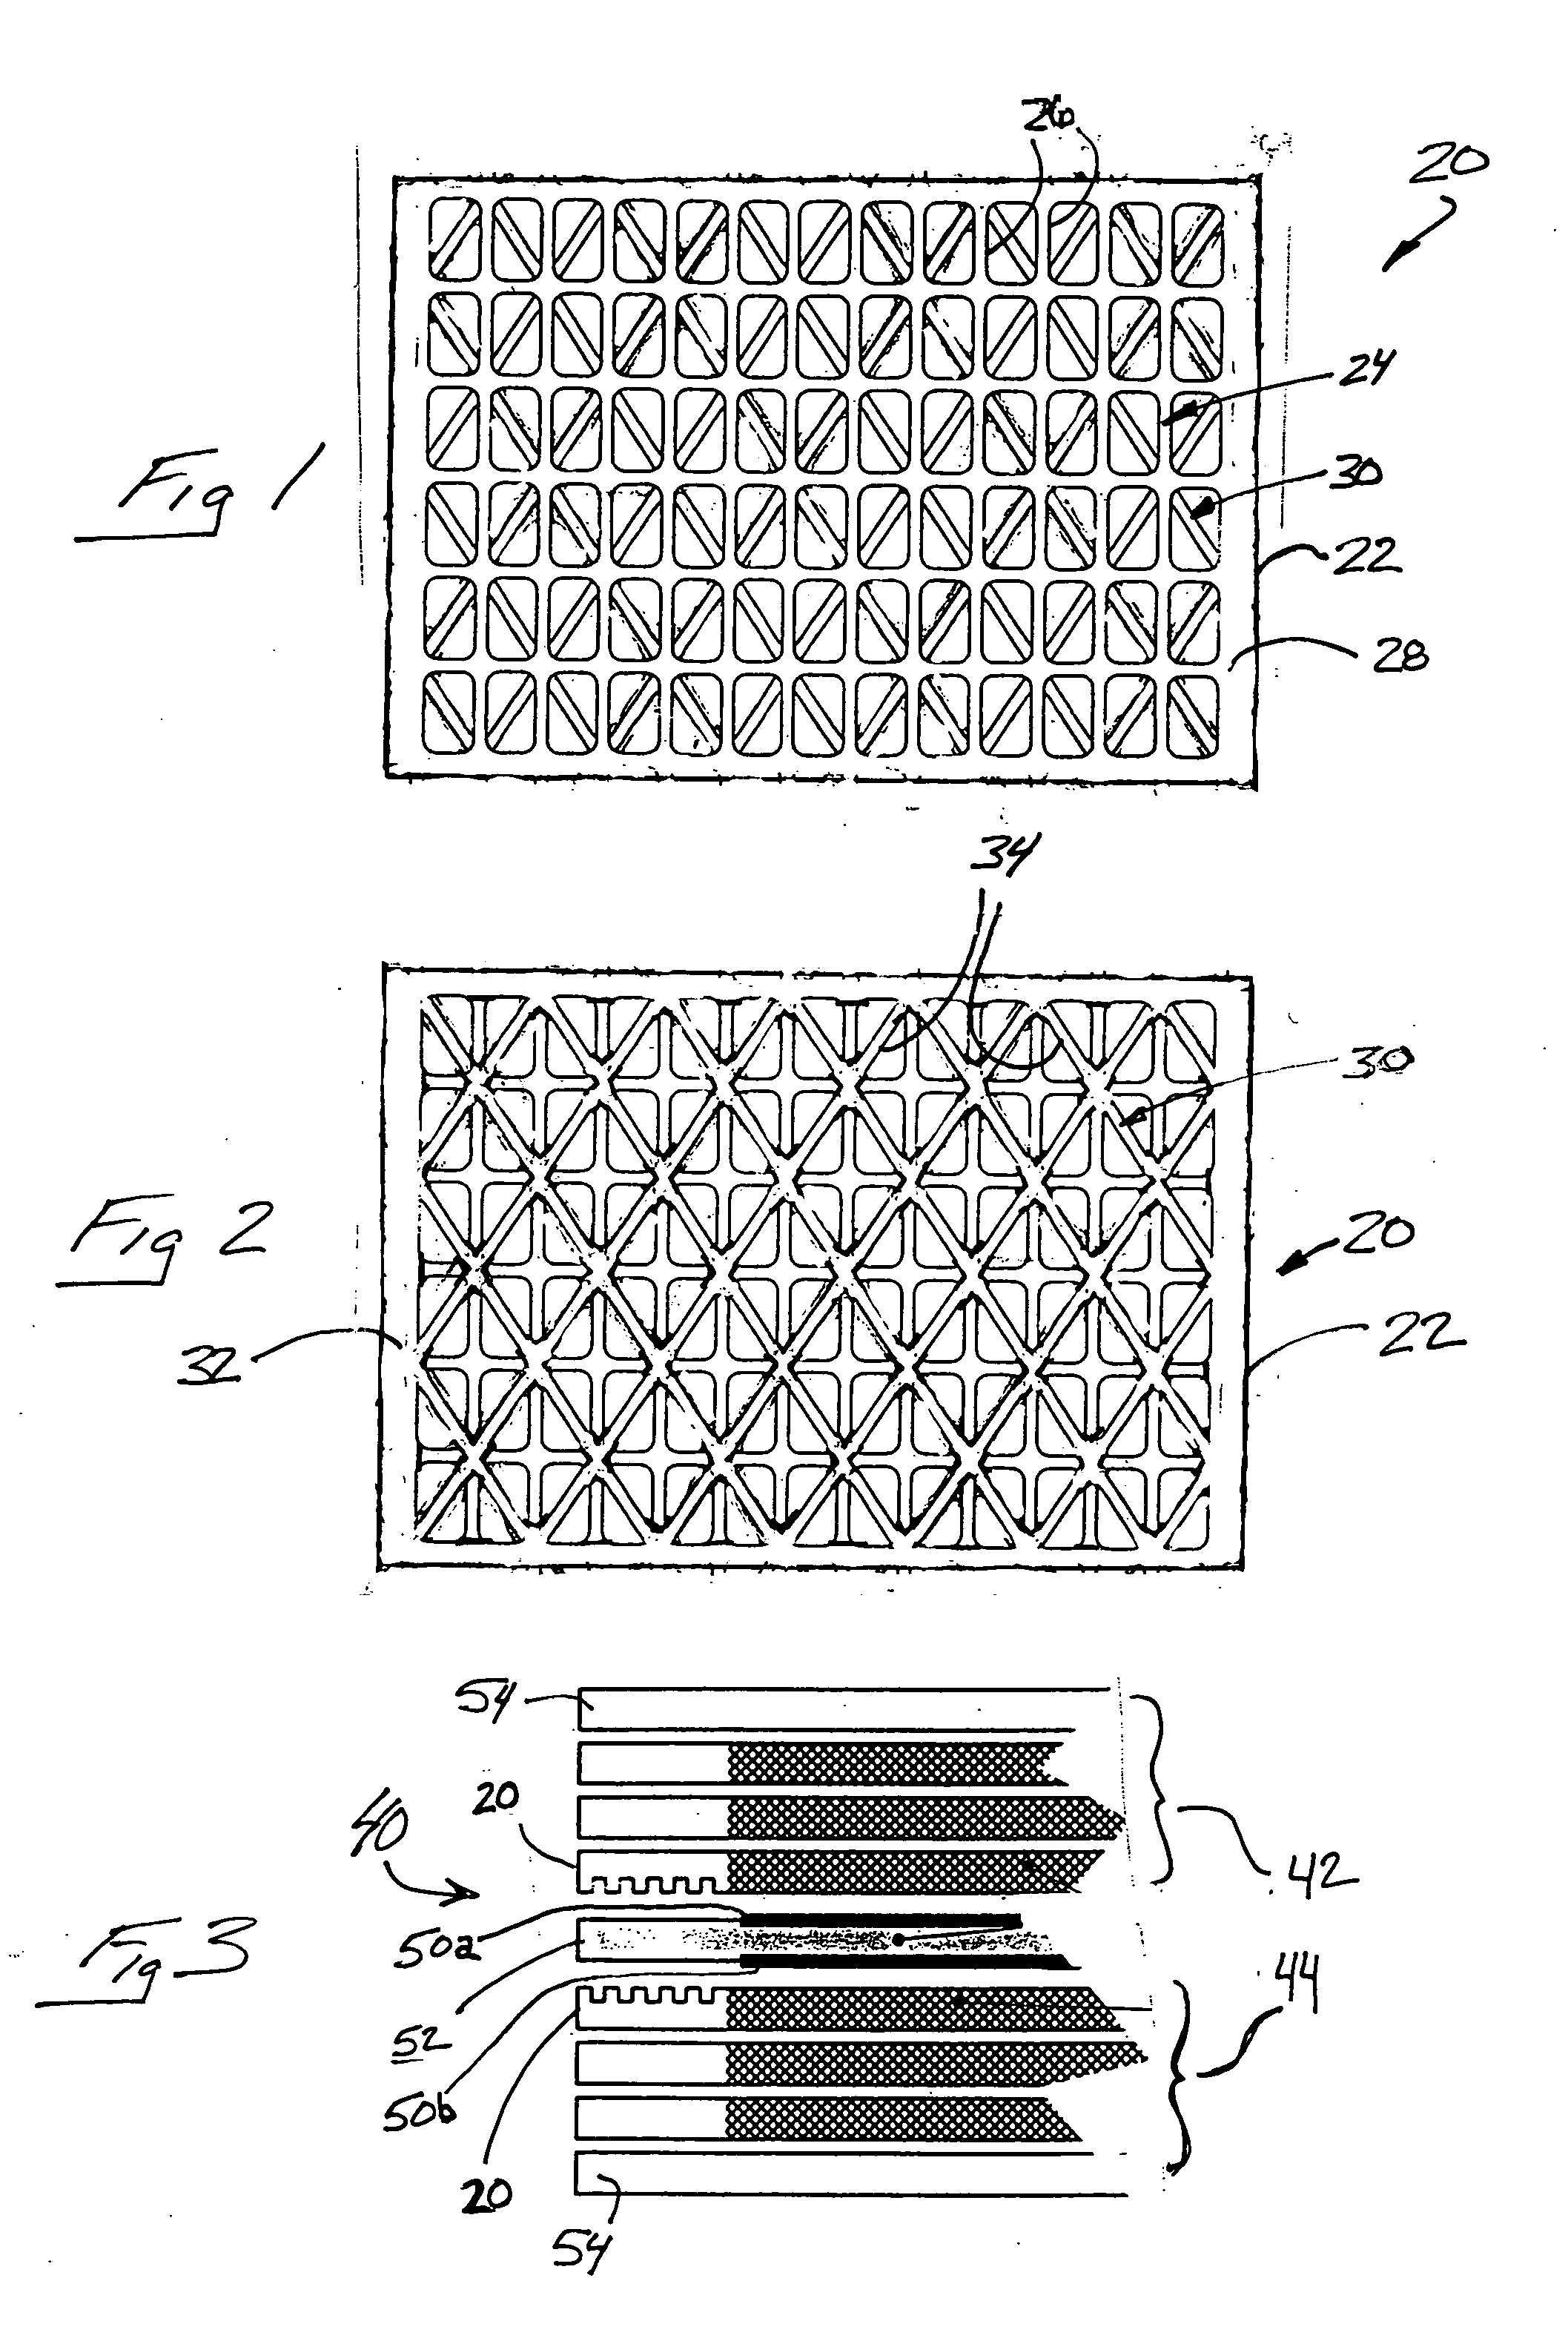 Electrolyte support member for high differential pressure electrochemical cell